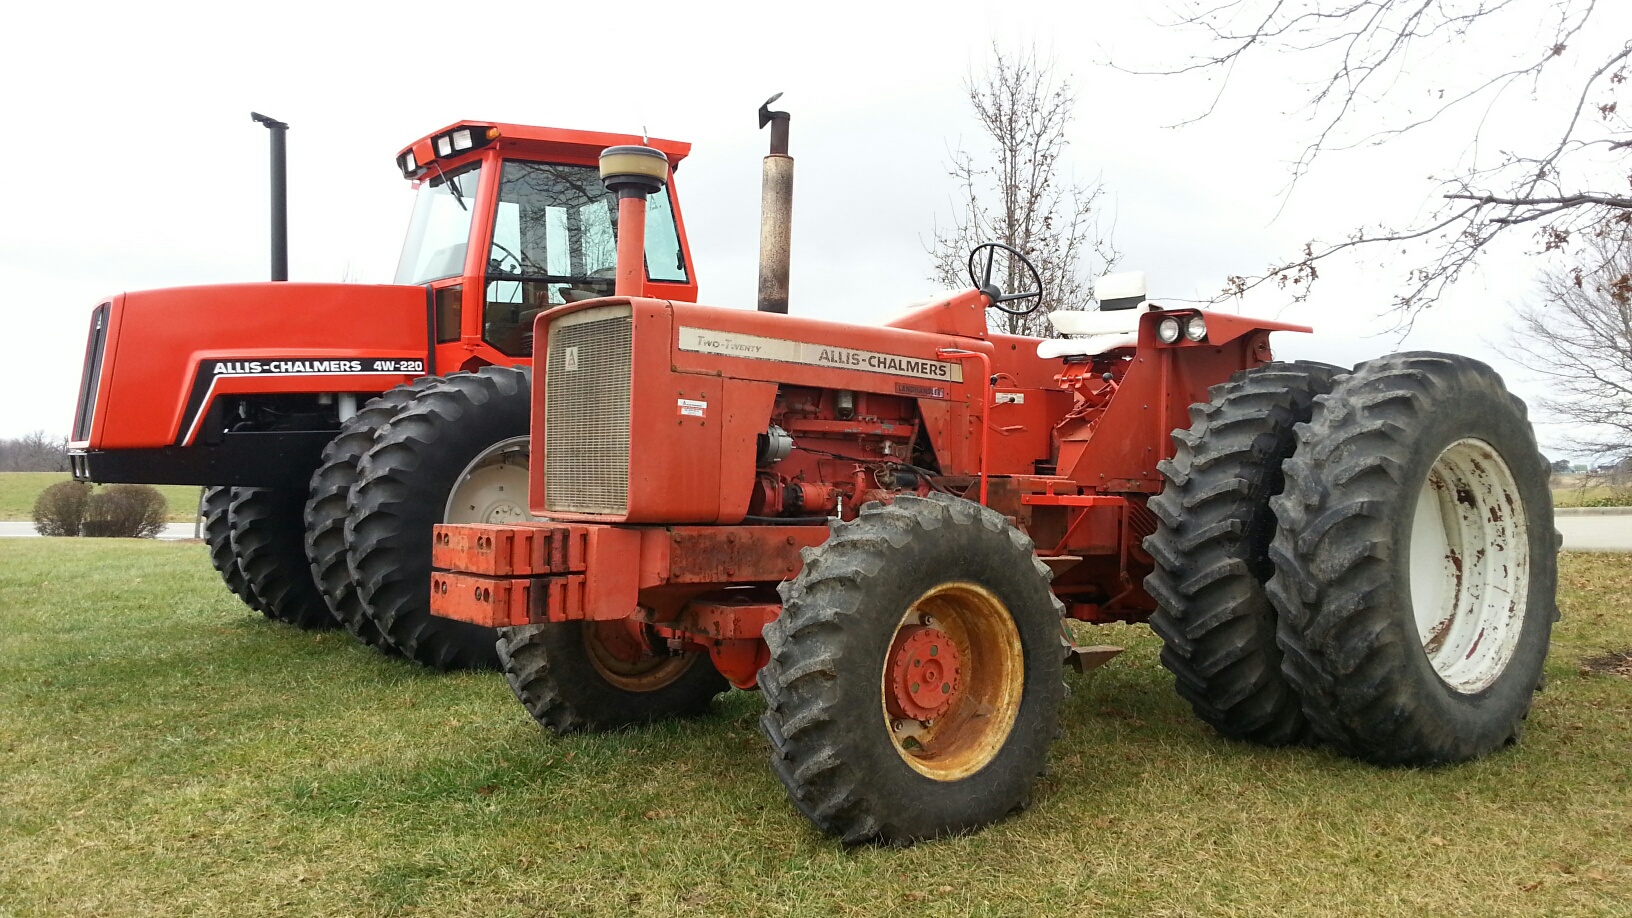 Allis Chalmers 4w 220 allis chalmers 4w - 220 for sale . online and ...